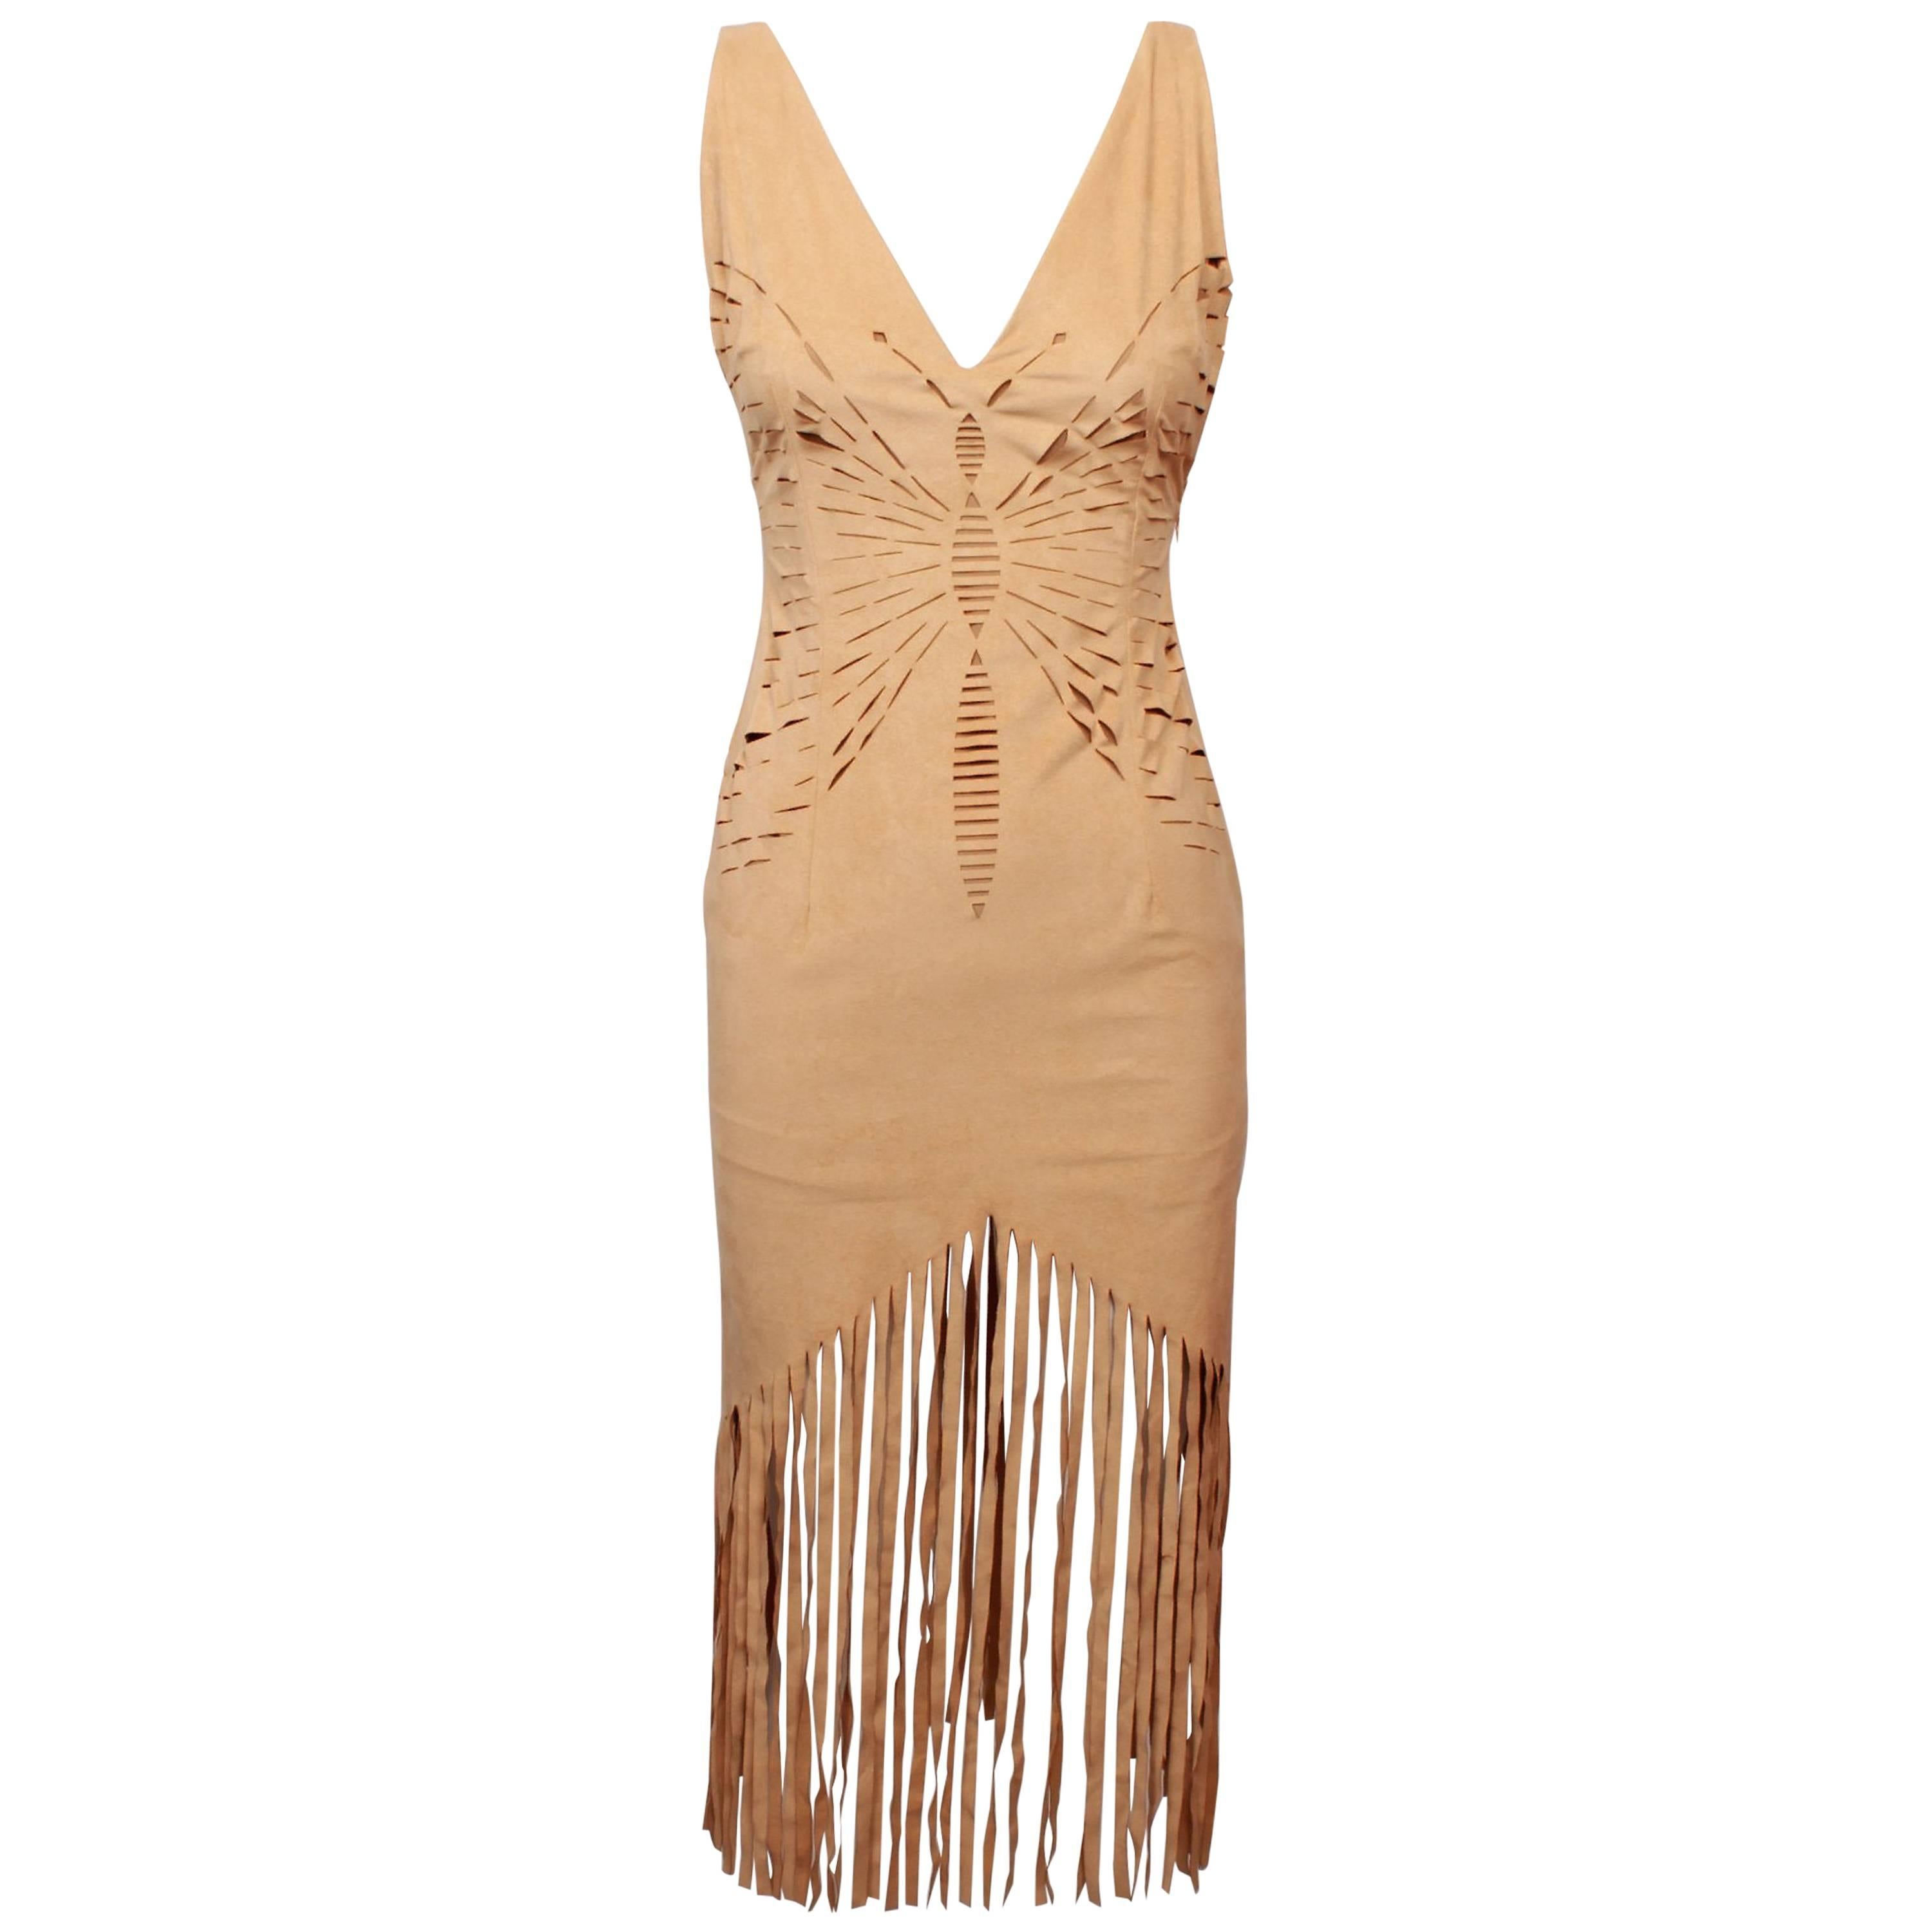 Christian Dior Beige "Suede Look" Laser Cut Butterfly Fringed Dress For Sale